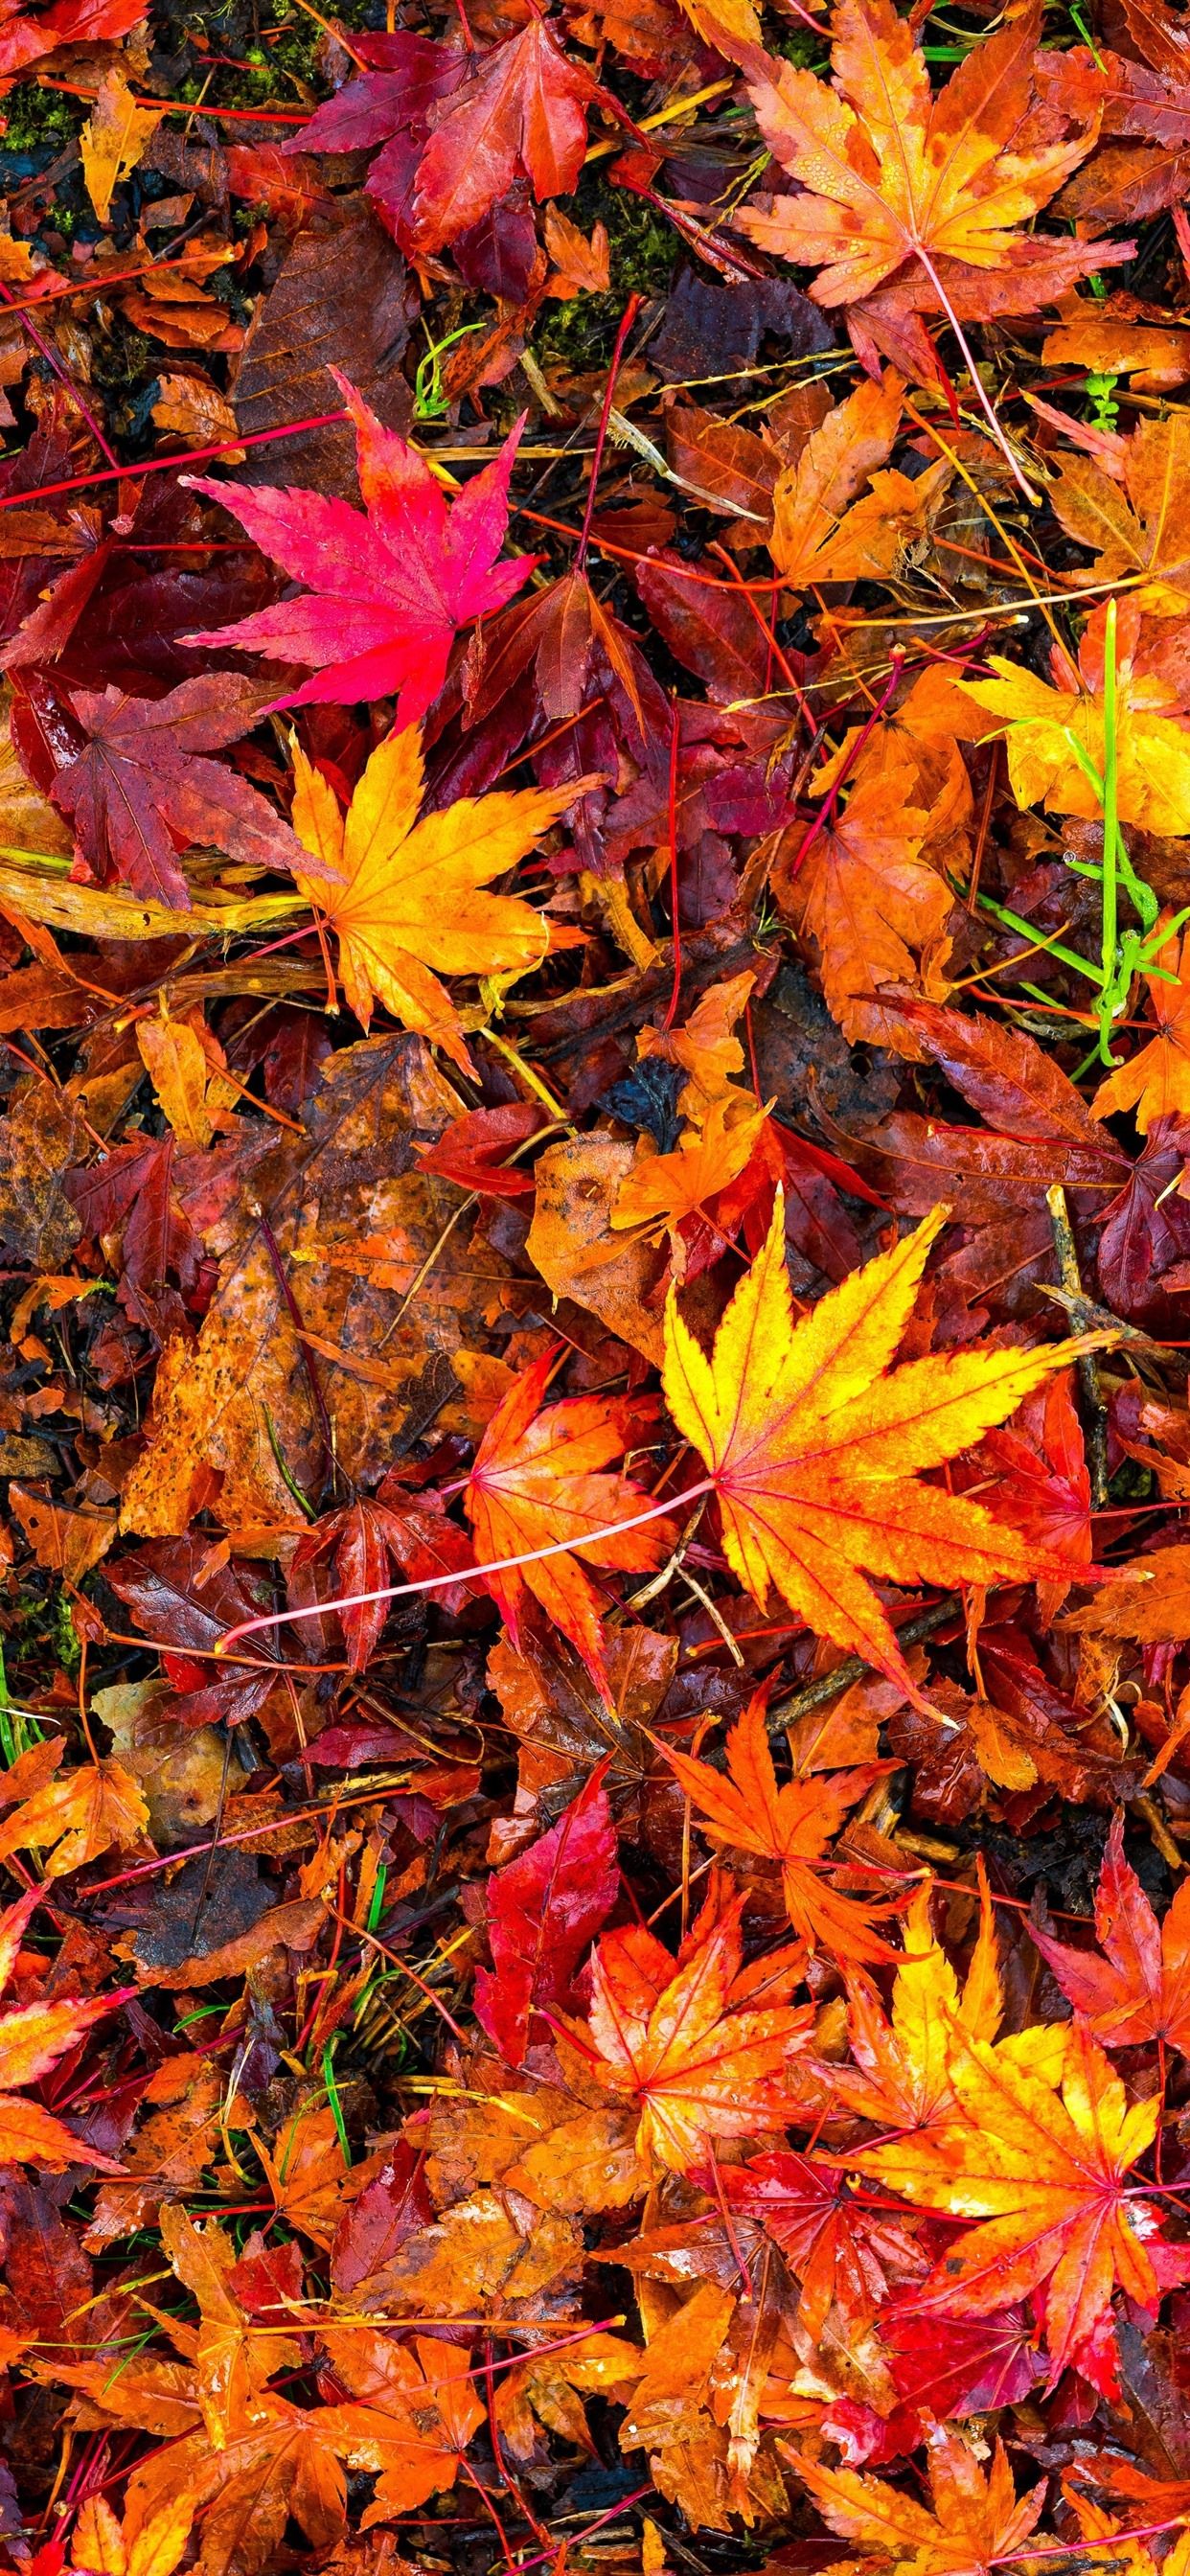 Falling Leaves iPhone Wallpaper Free Falling Leaves iPhone Background